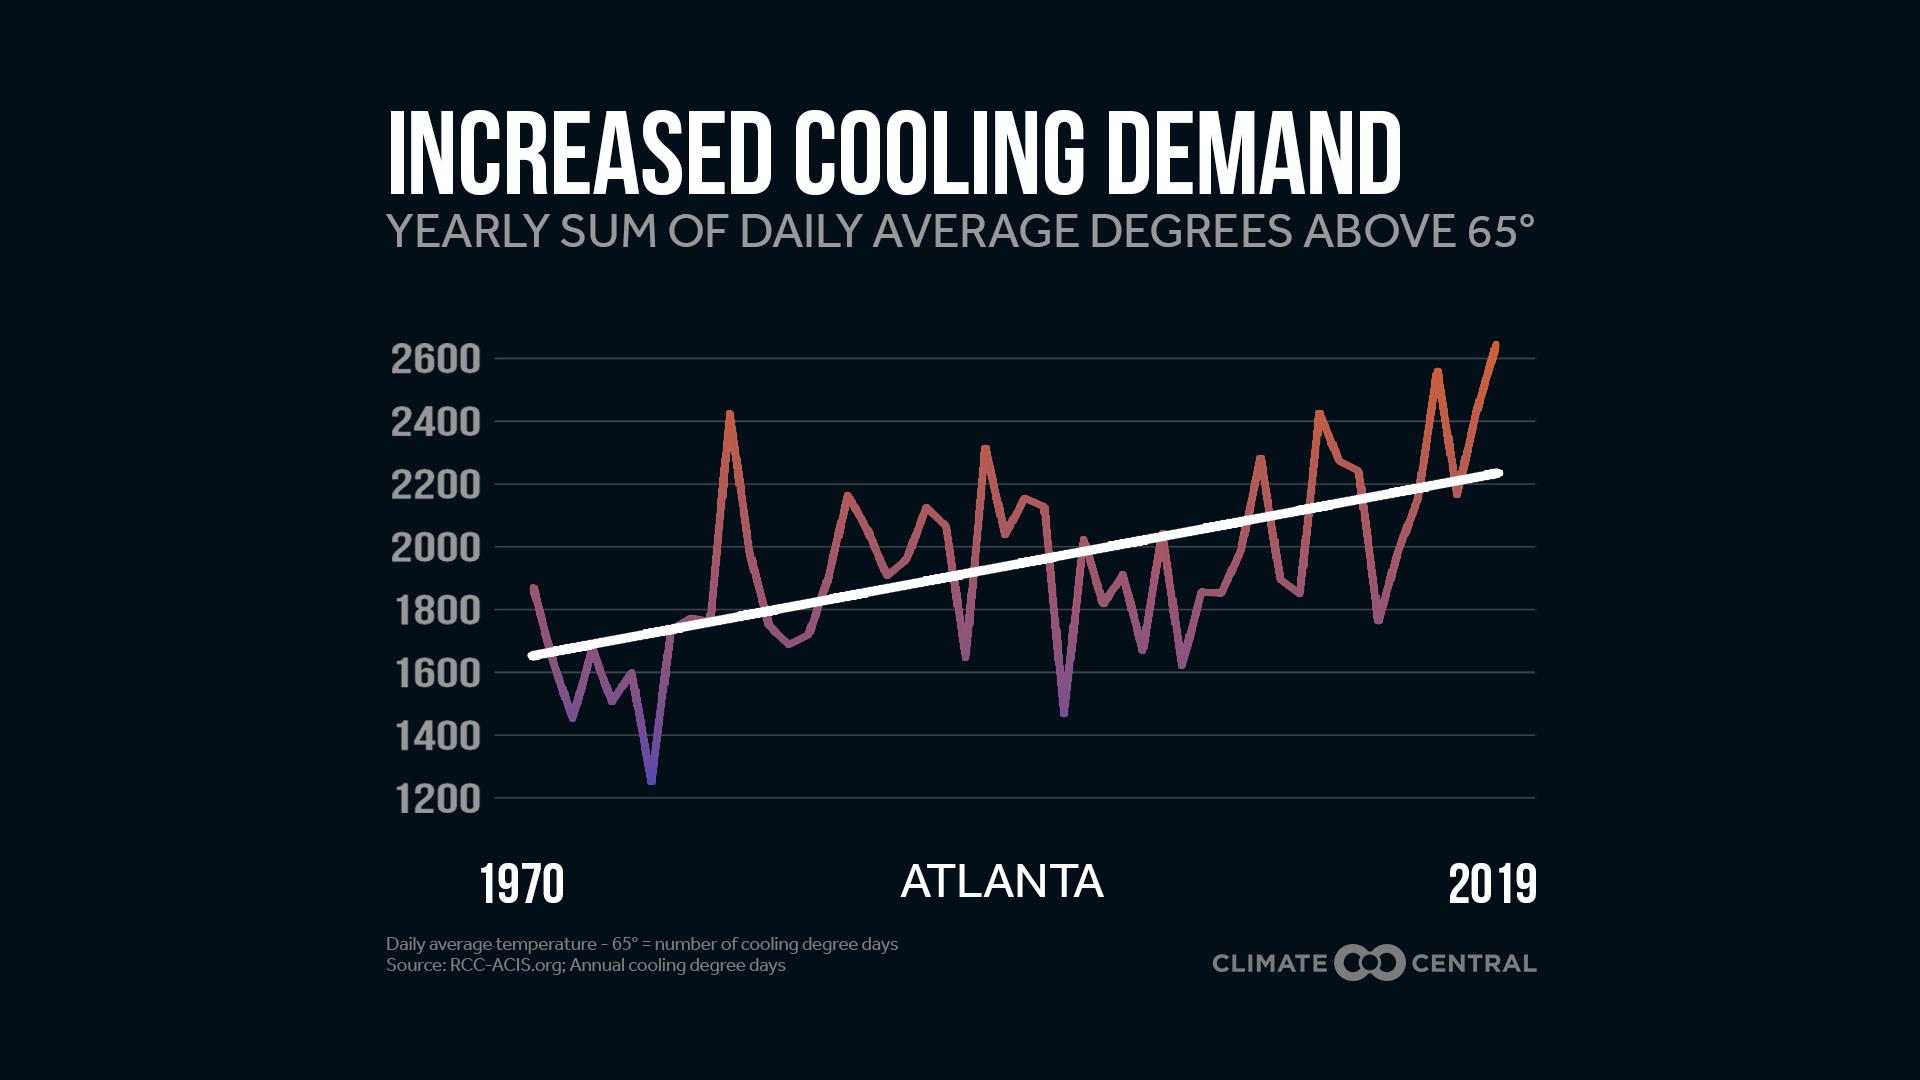 Increased Cooling Demand - Hotter Climate, More Cooling Demand